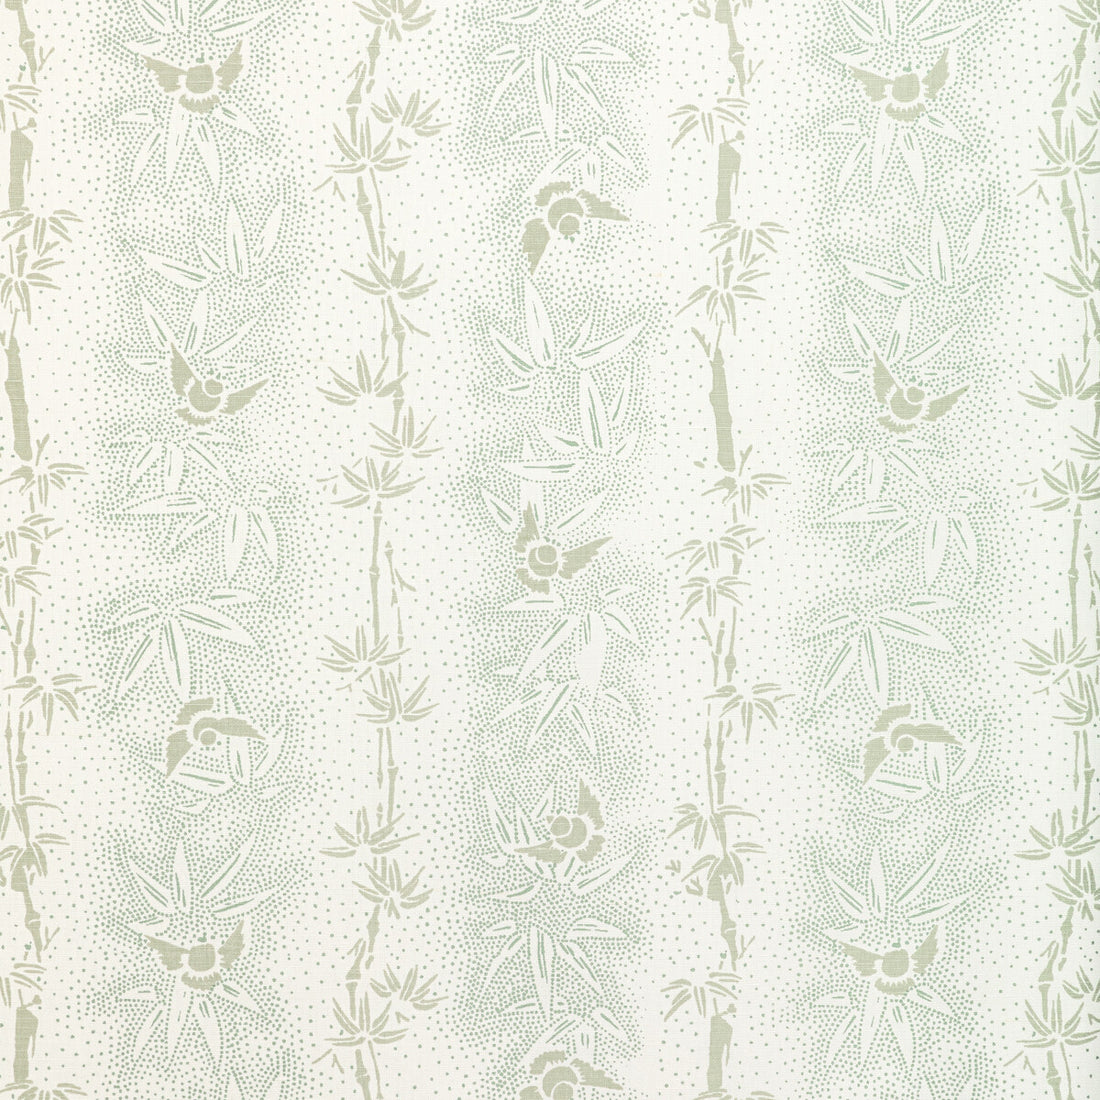 Passerine fabric in lichen color - pattern PASSERINE.311.0 - by Kravet Couture in the Jan Showers Charmant collection